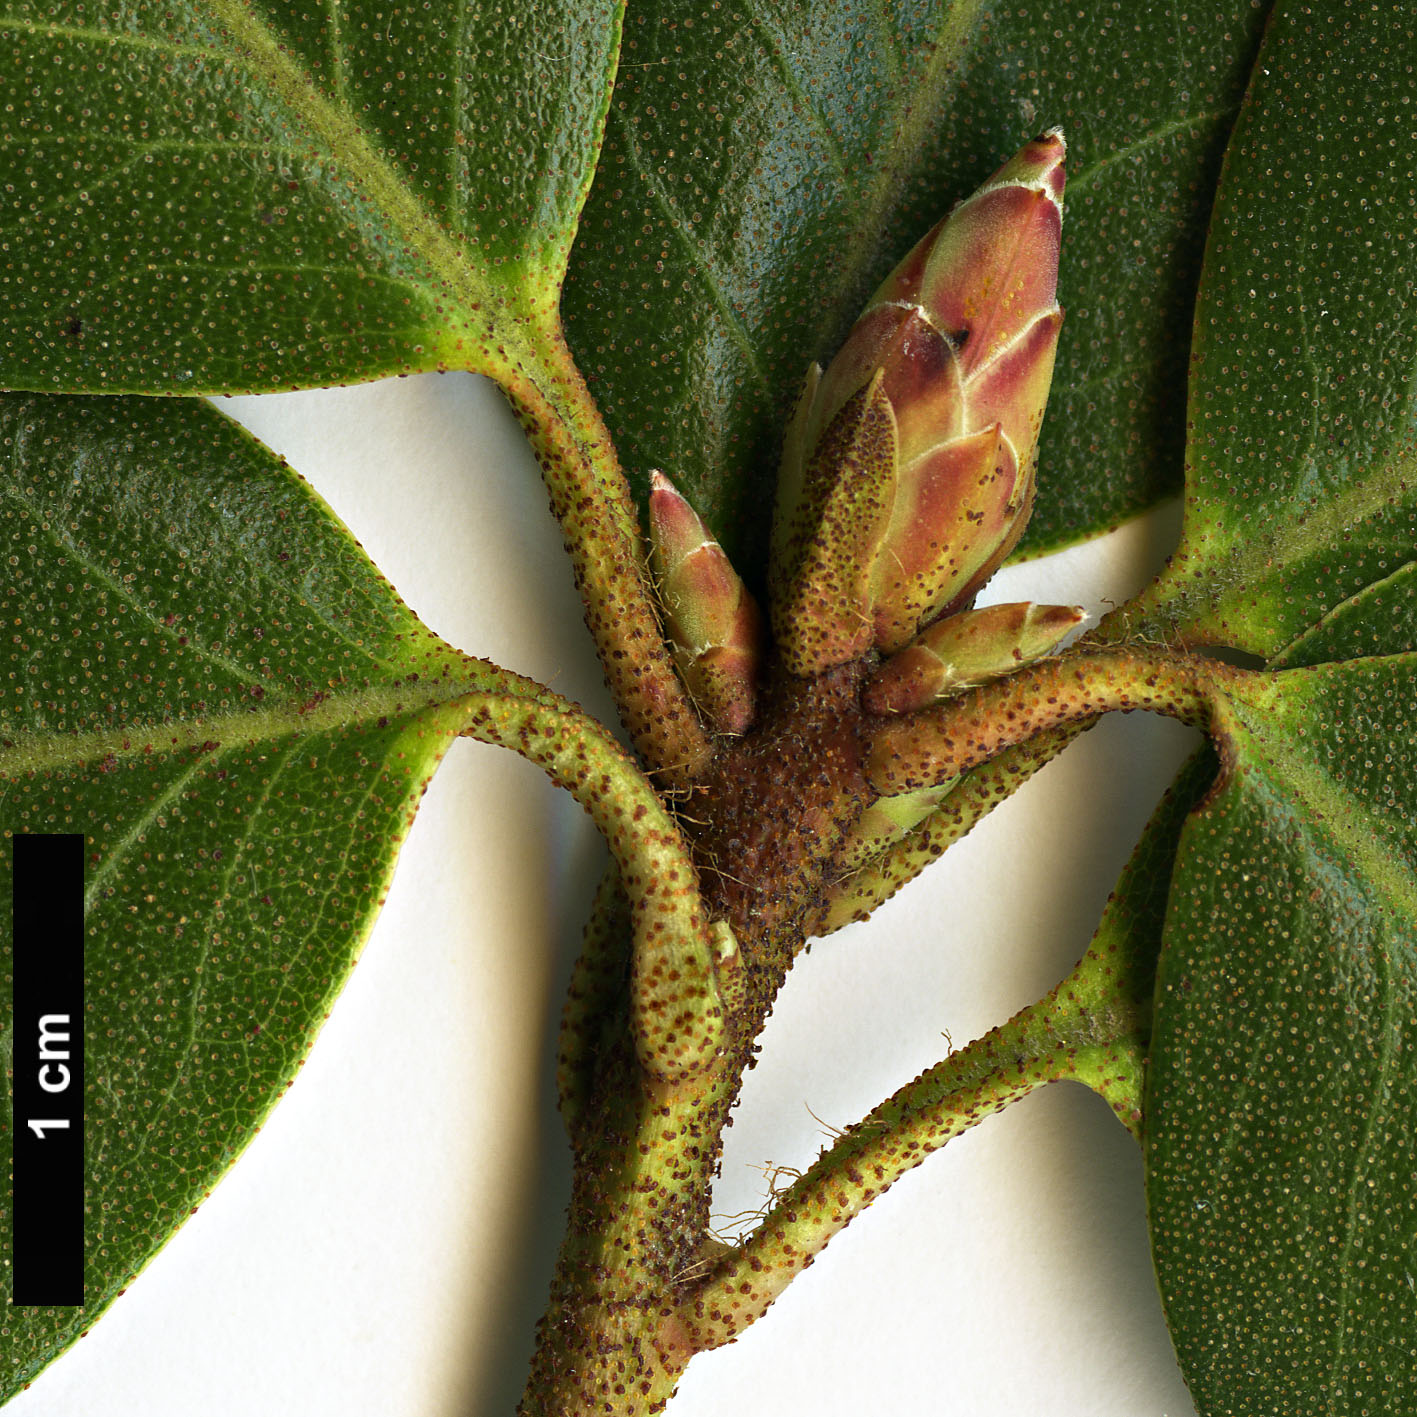 High resolution image: Family: Ericaceae - Genus: Rhododendron - Taxon: amesiae